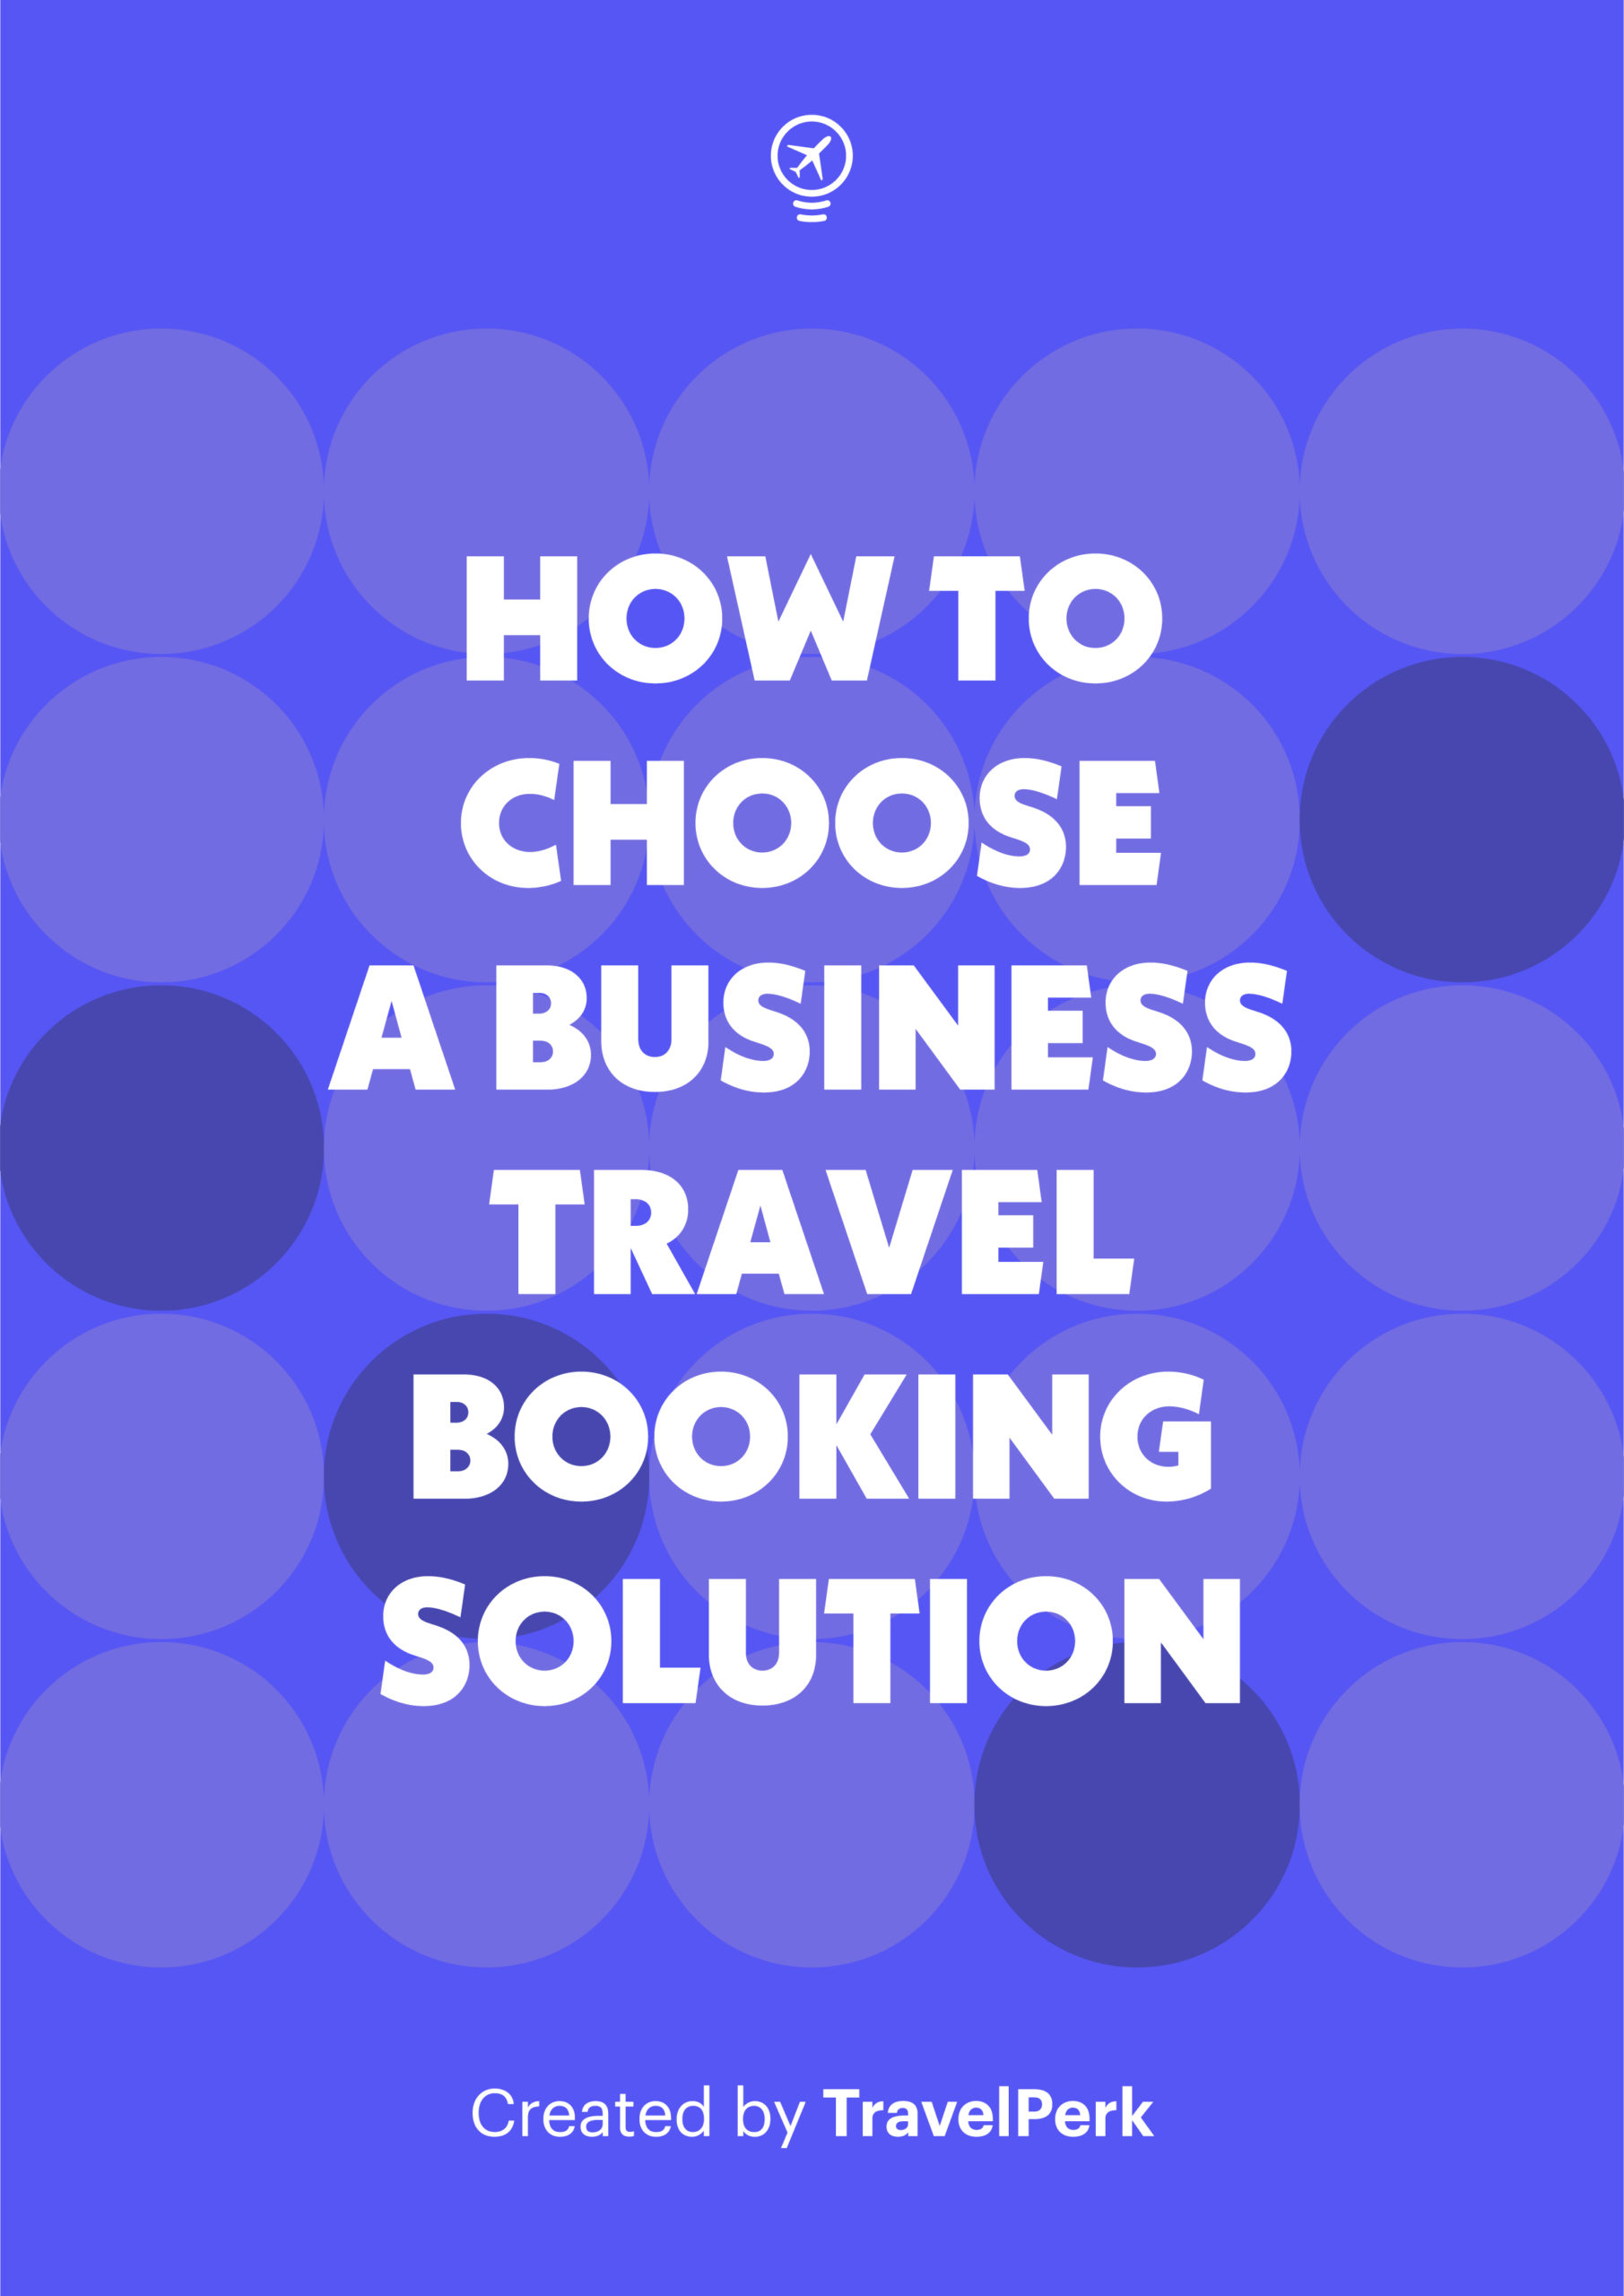 How to choose a business travel booking solution that travelers love